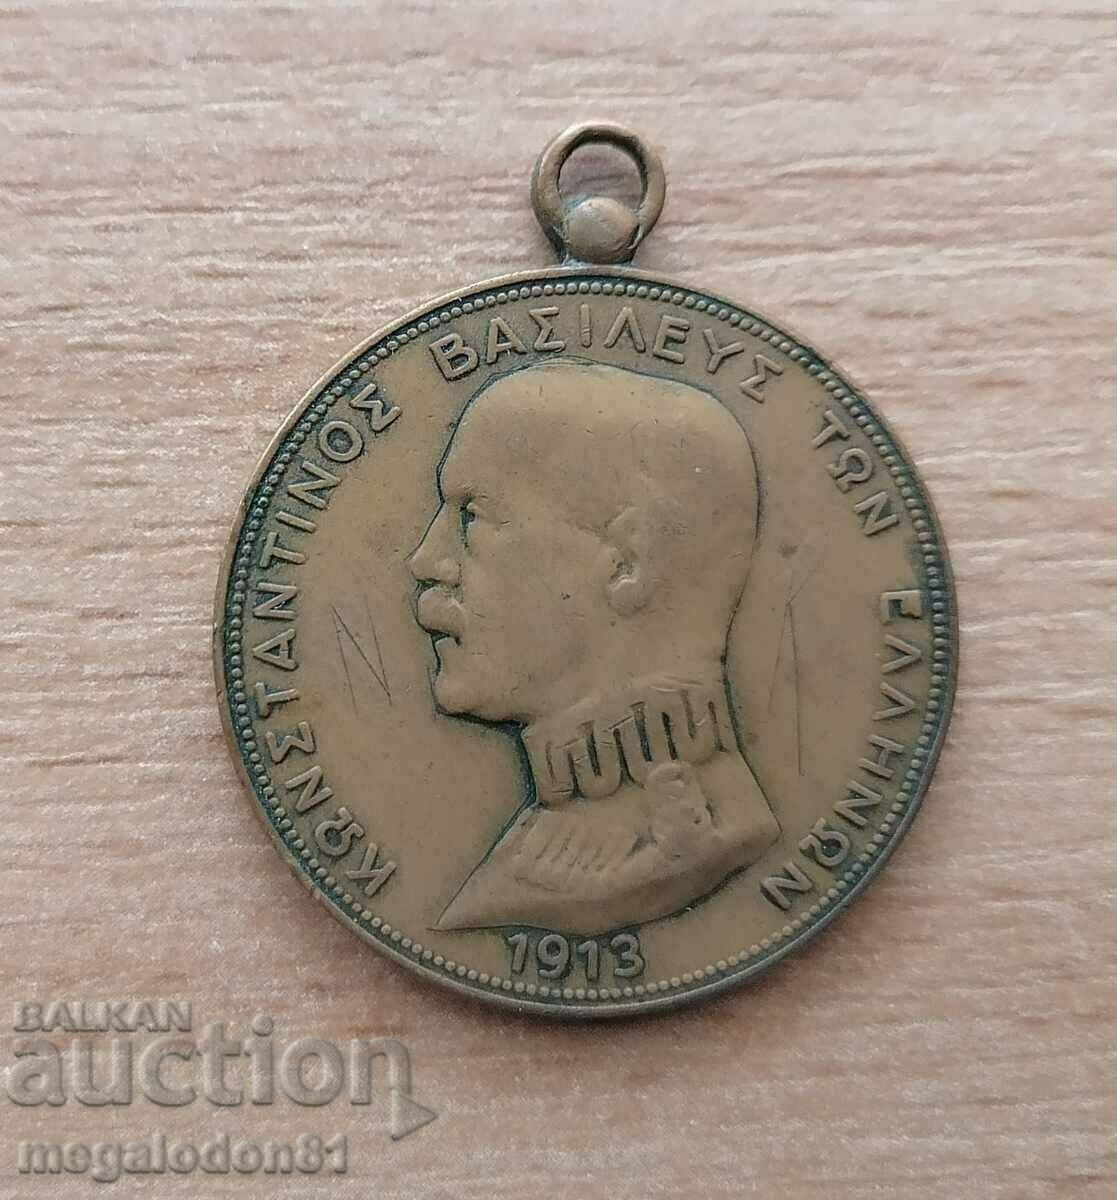 Greece - military medal from the Balkan War 1913.